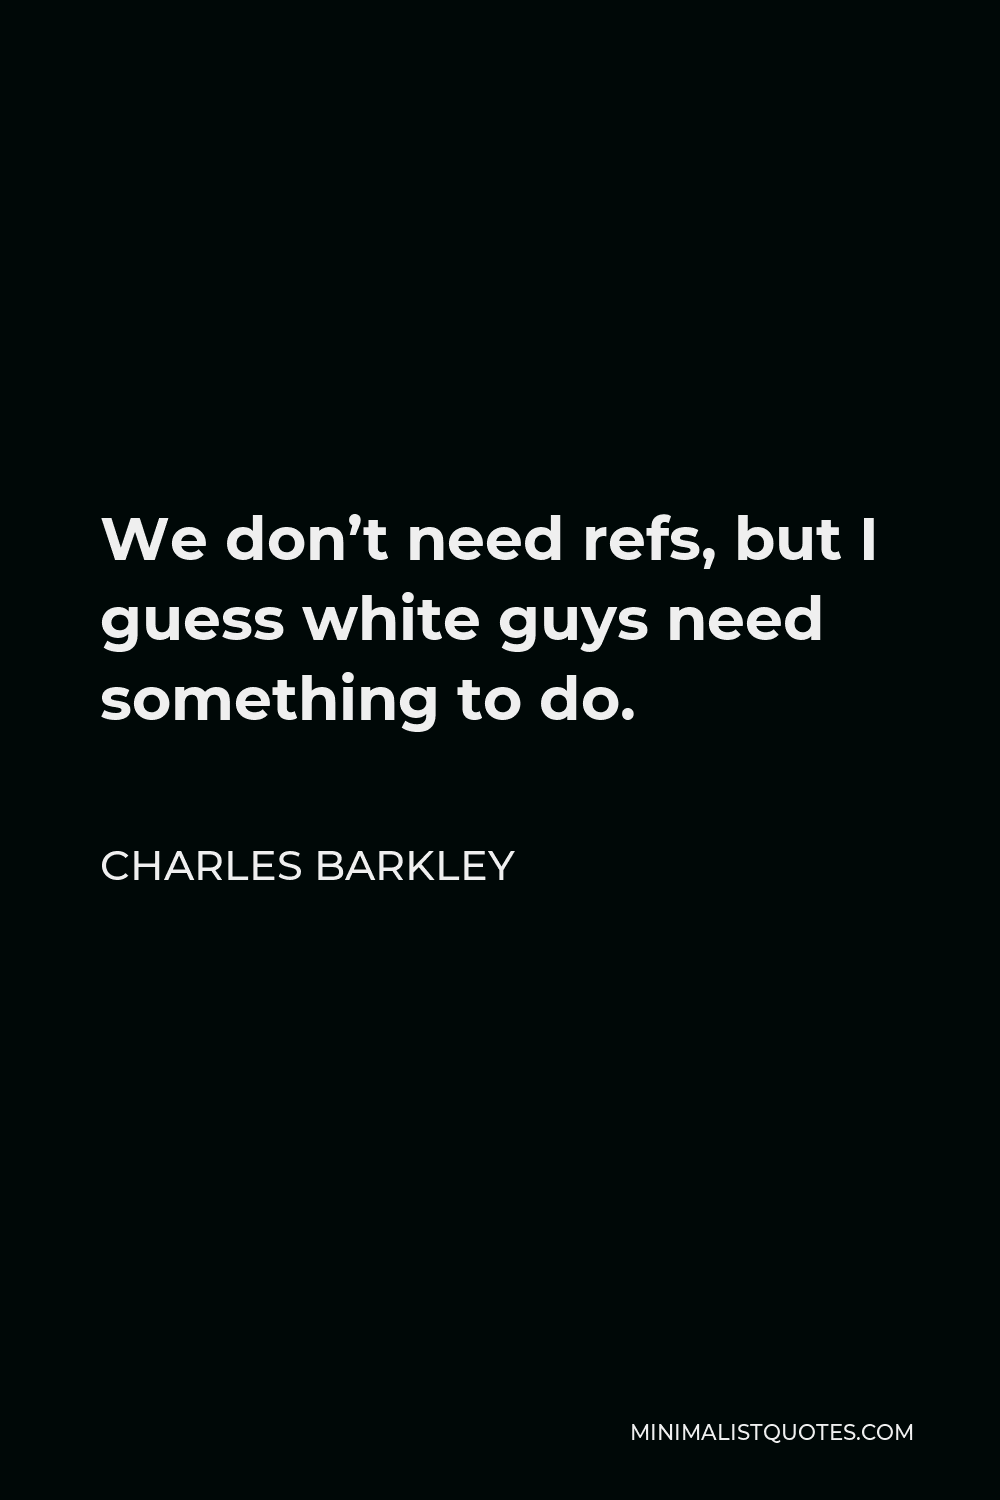 Charles Barkley Quote - We don’t need refs, but I guess white guys need something to do.